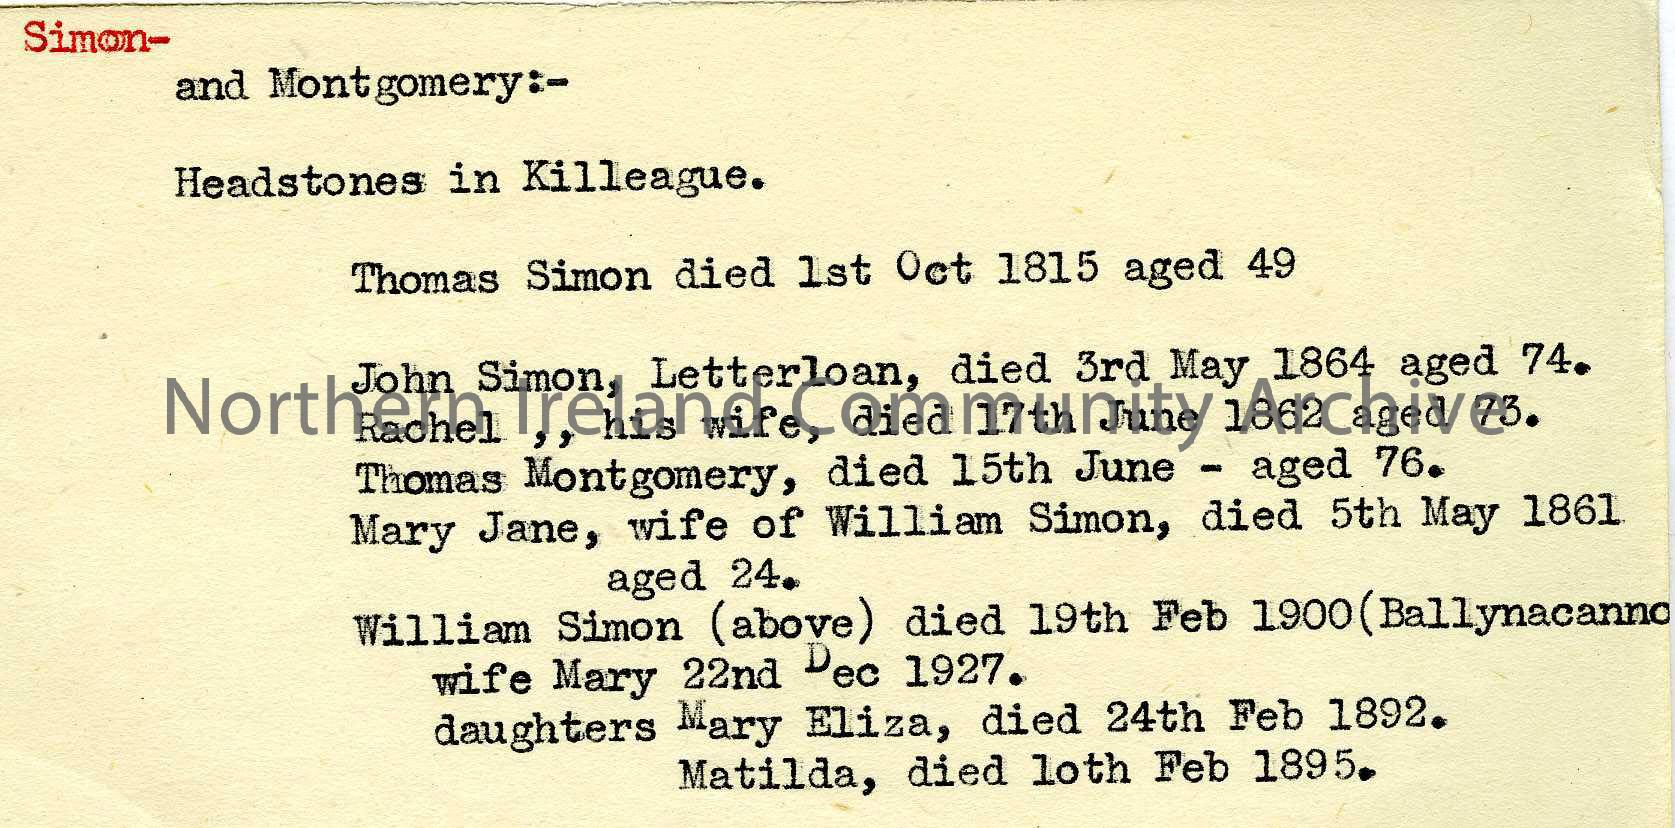 typed information re Simon and Montgomery headstones in Killeague